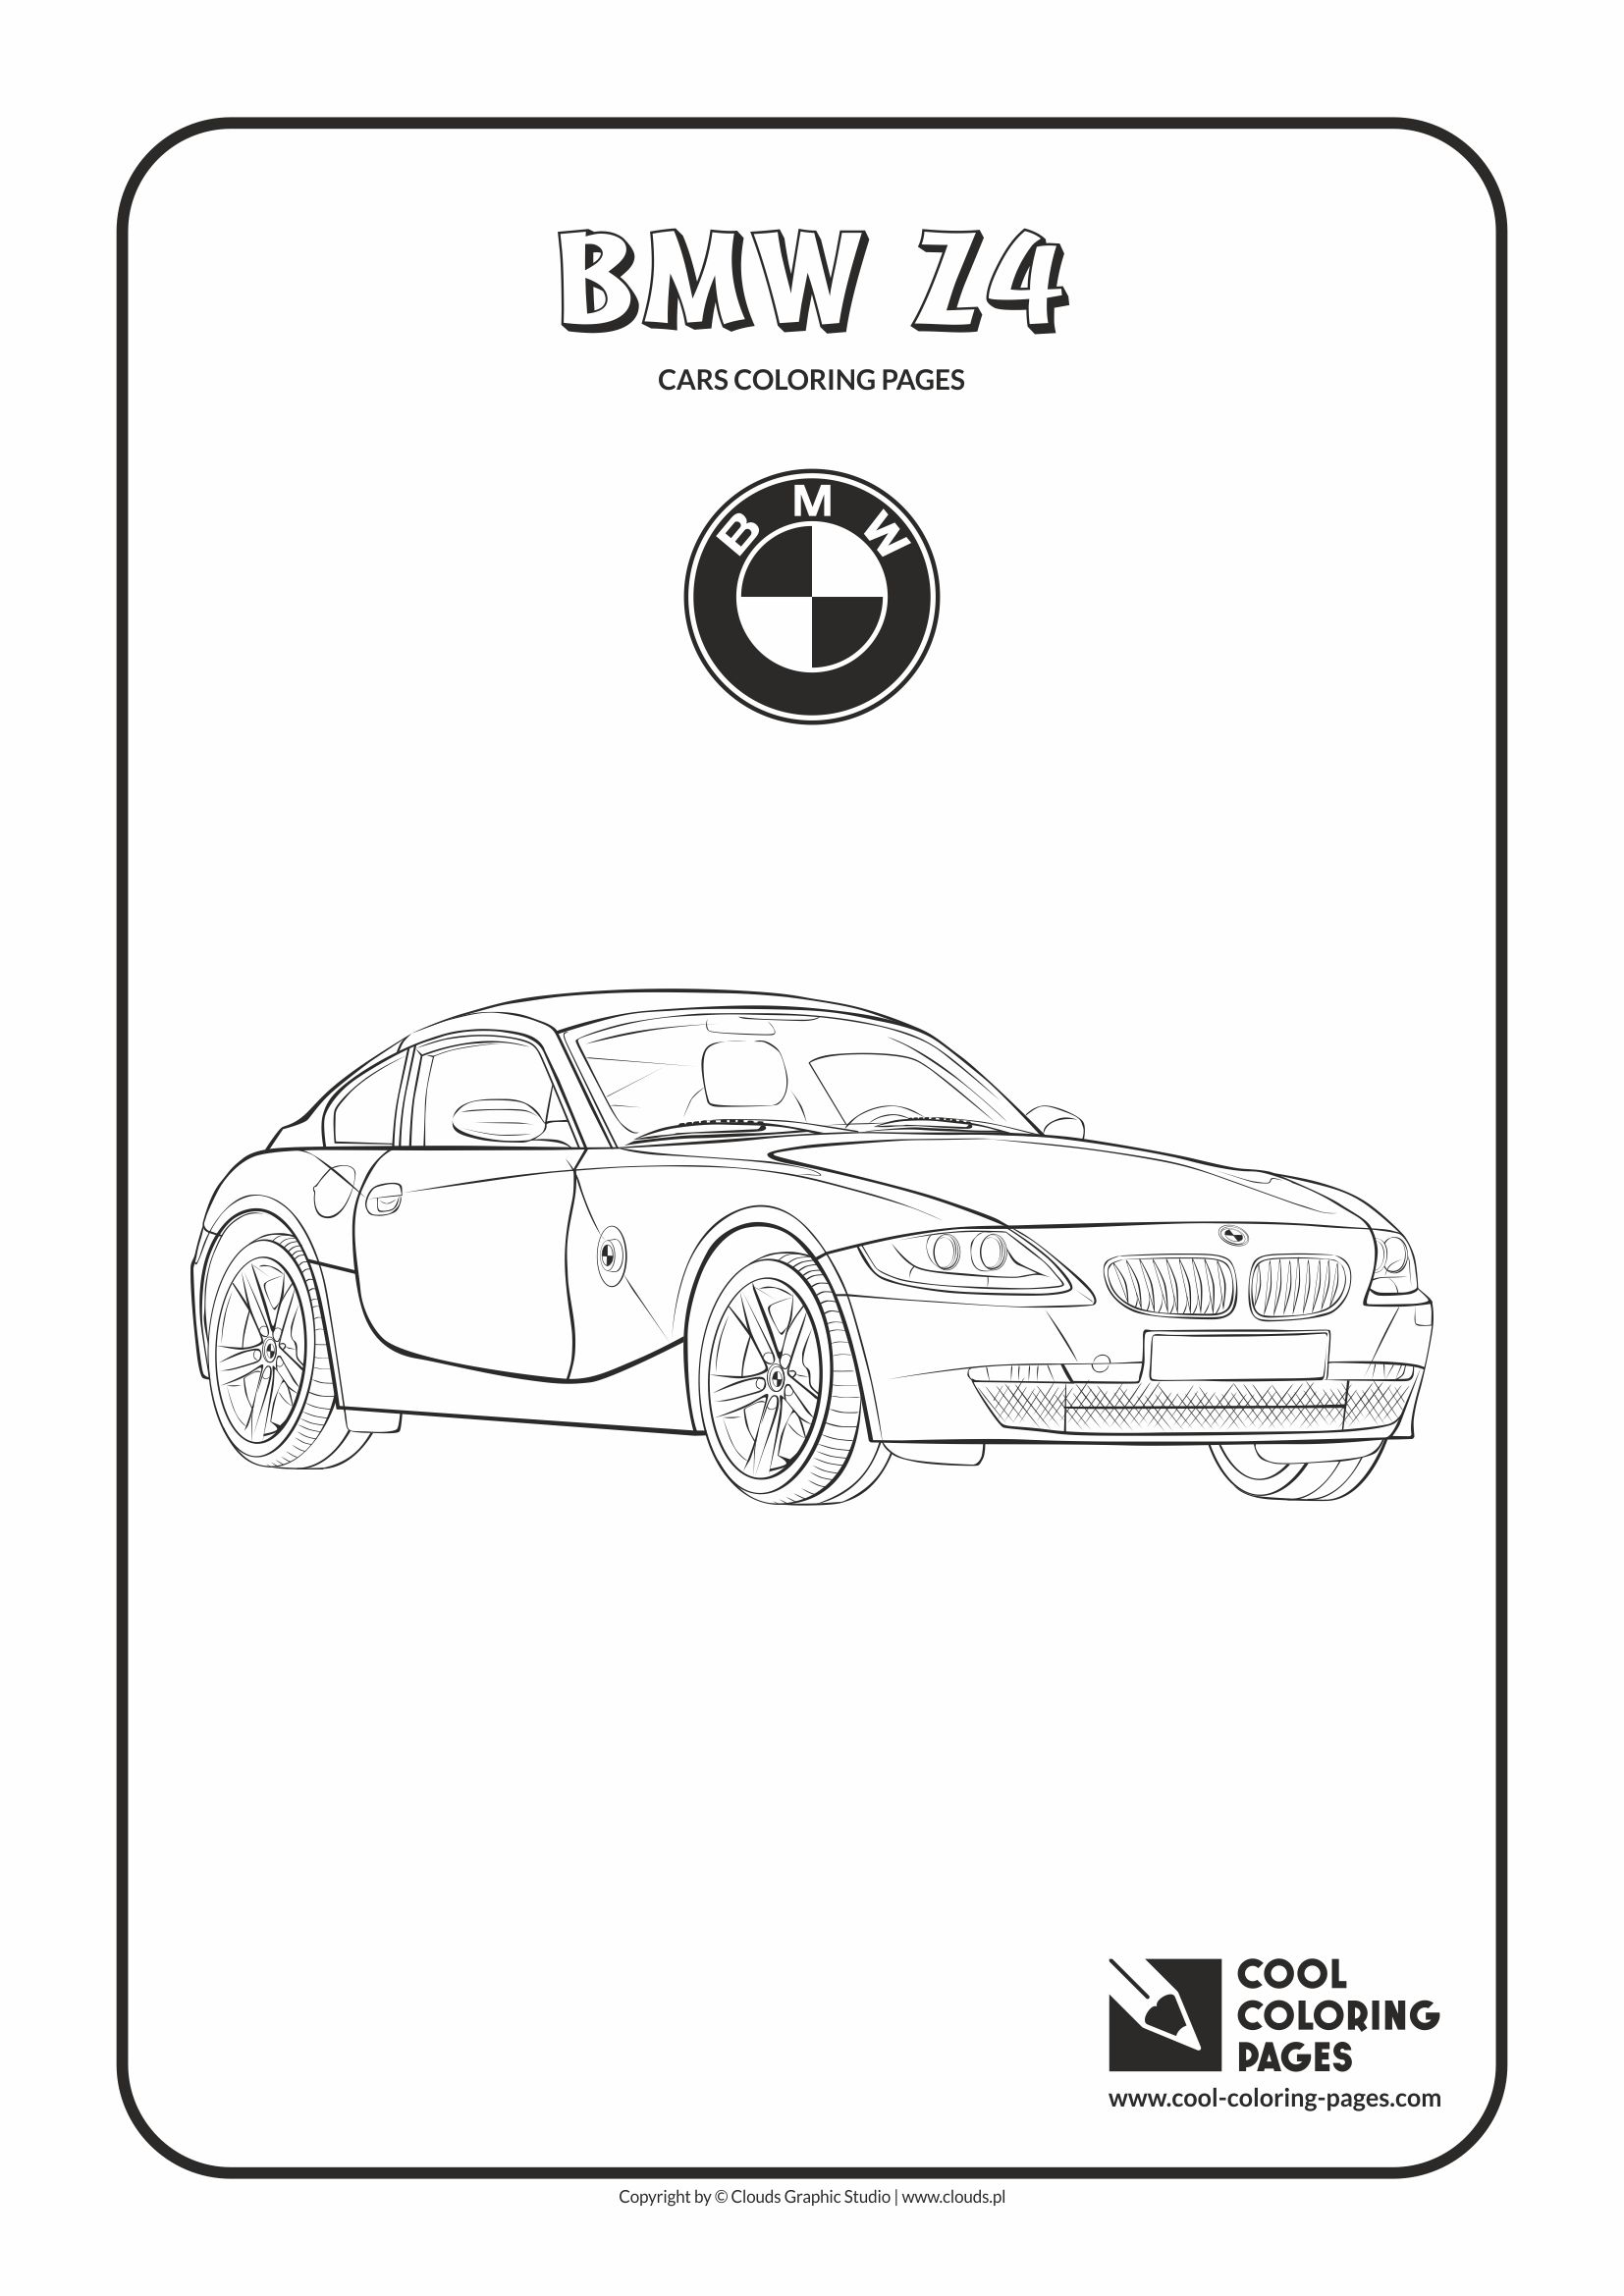 Cool Coloring Pages - Vehicles / BMW Z4 / Coloring page with BMW Z4